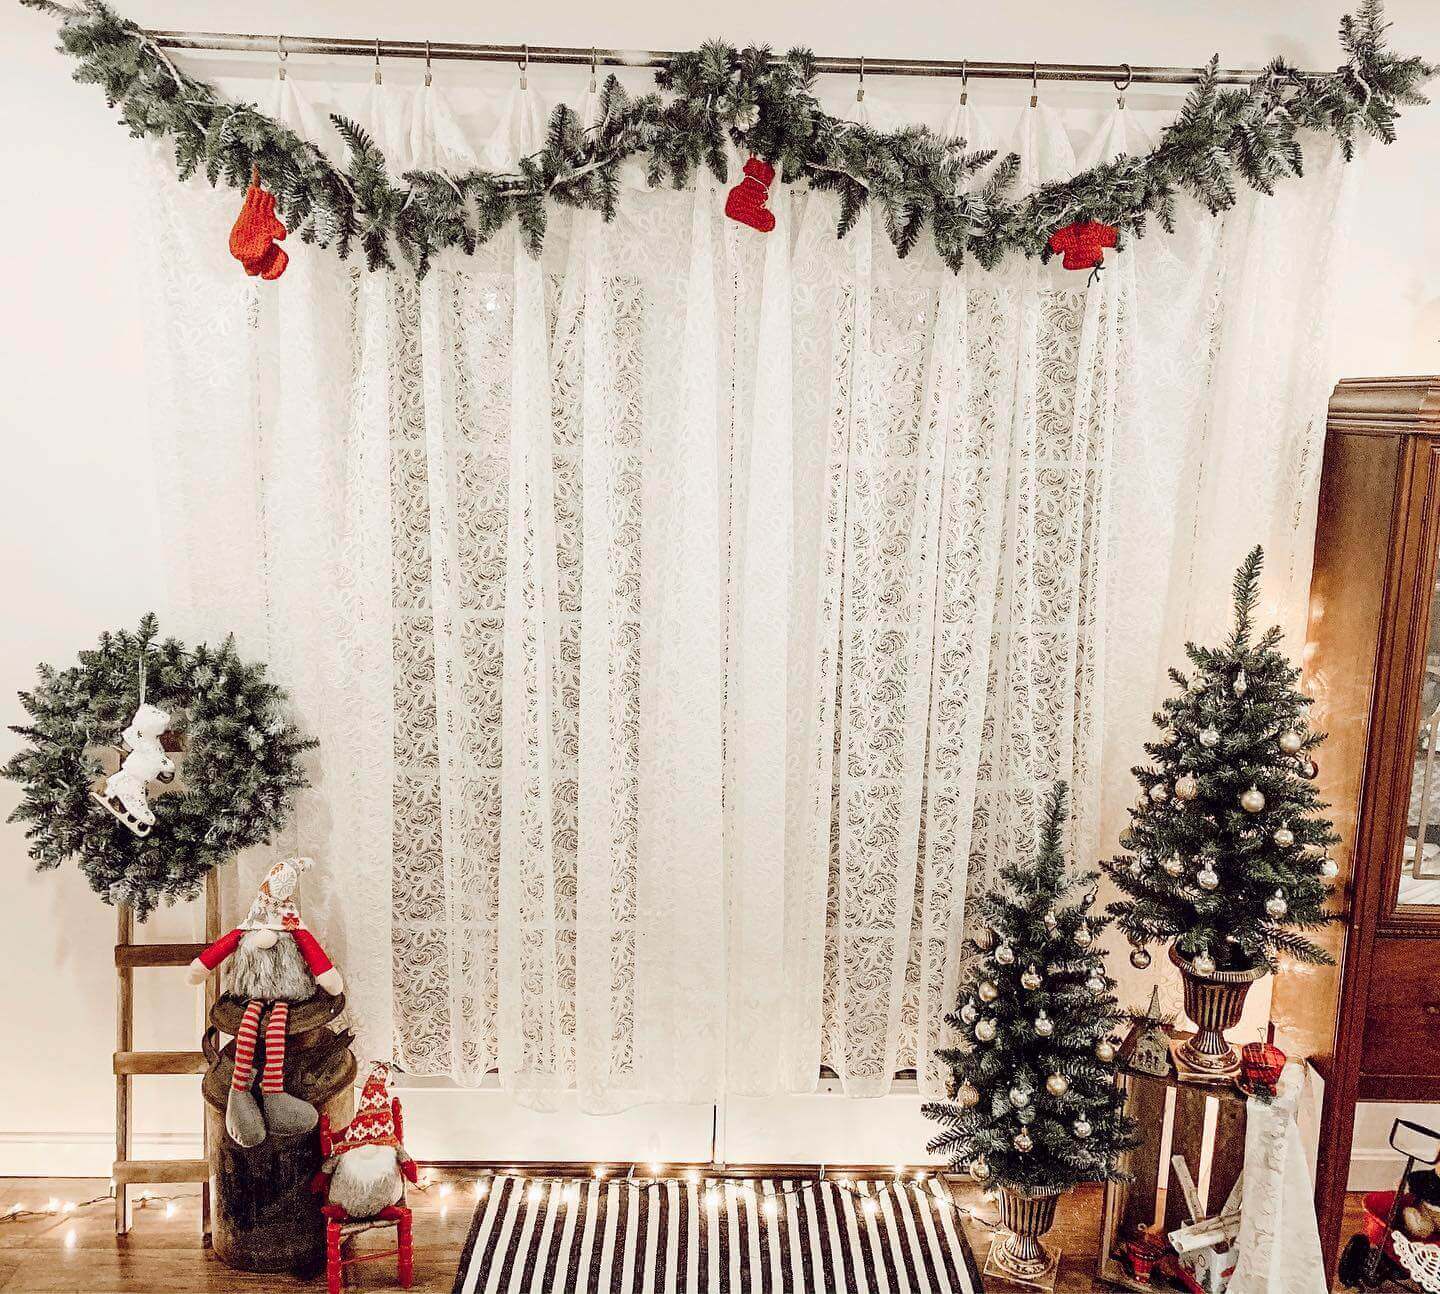  12 Pieces 79 ft Christmas Garland White Garland for